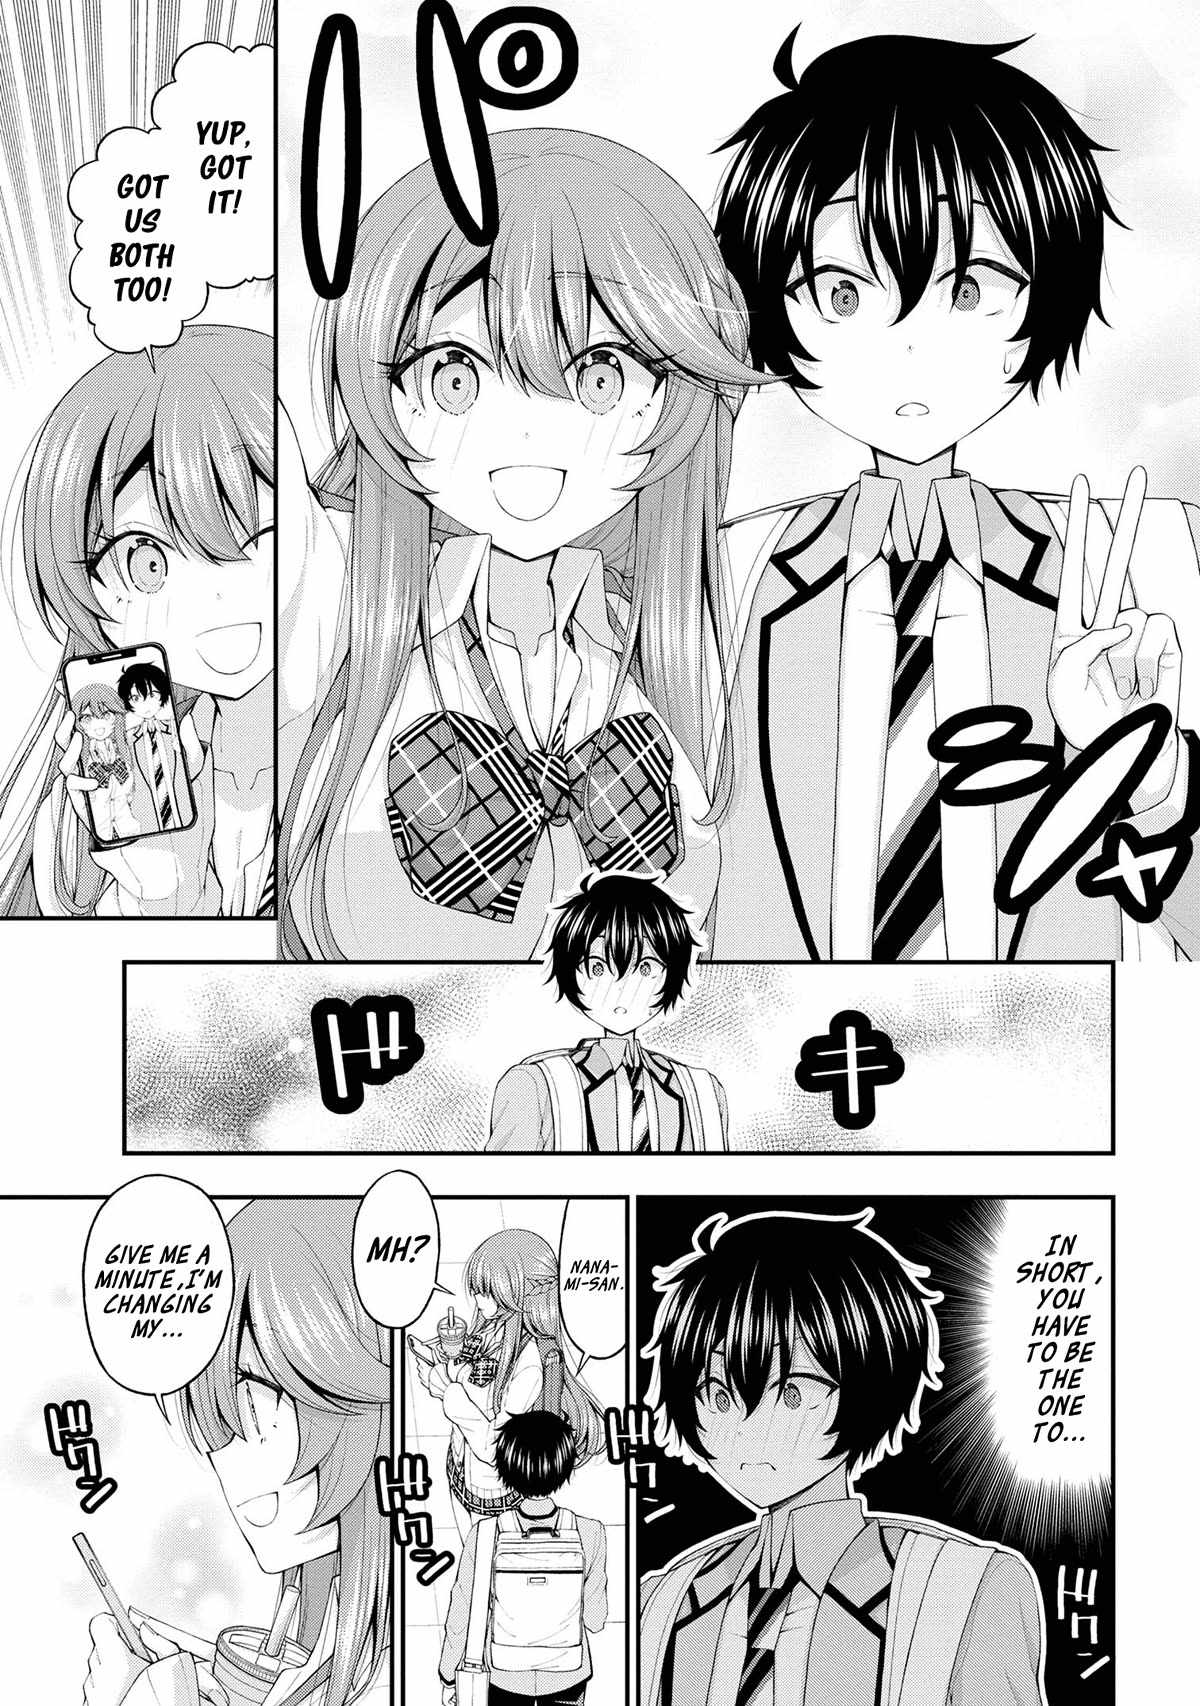 The Gal Who Was Meant to Confess to Me as a Game Punishment Has Apparently Fallen in Love with Me Chapter 14-eng-li - Page 8